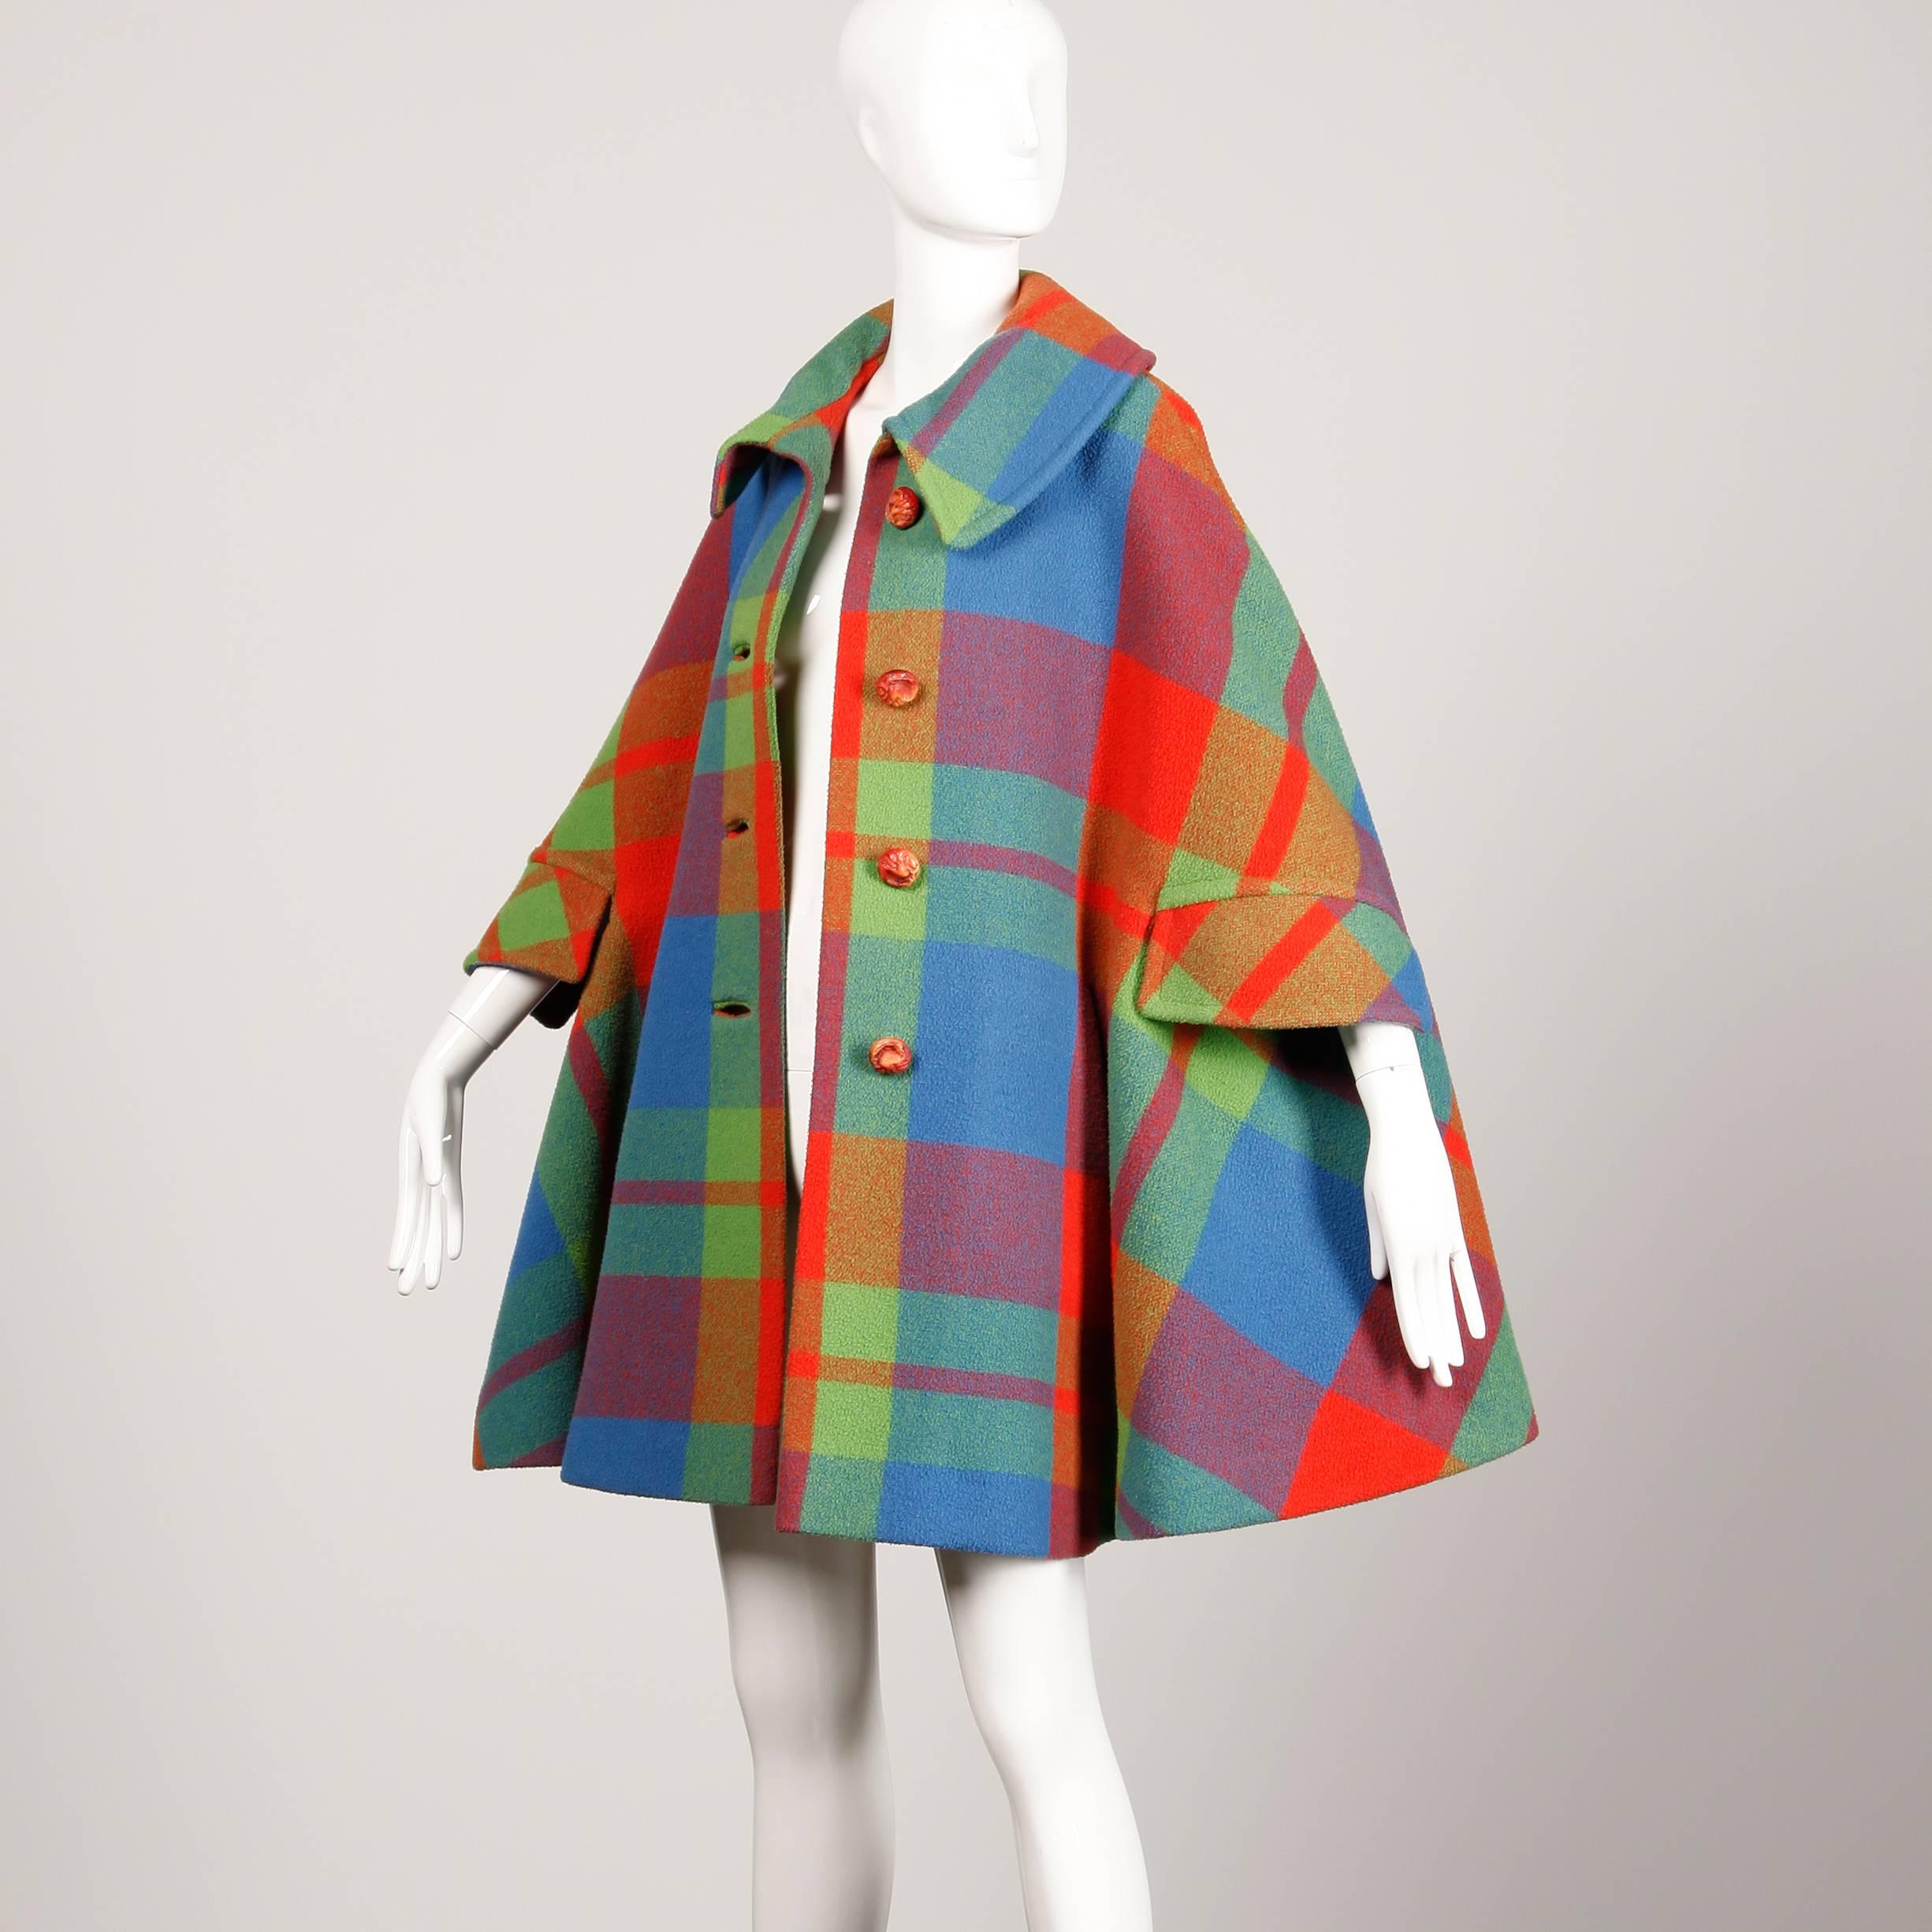 Vibrant vintage plaid wool cape coat from the 1960s by George Richards. Arm slits and side pockets. Front button closure with satin lining. This piece is in excellent vintage condition with no noted flaws. It should fit most sizes XS-XL.